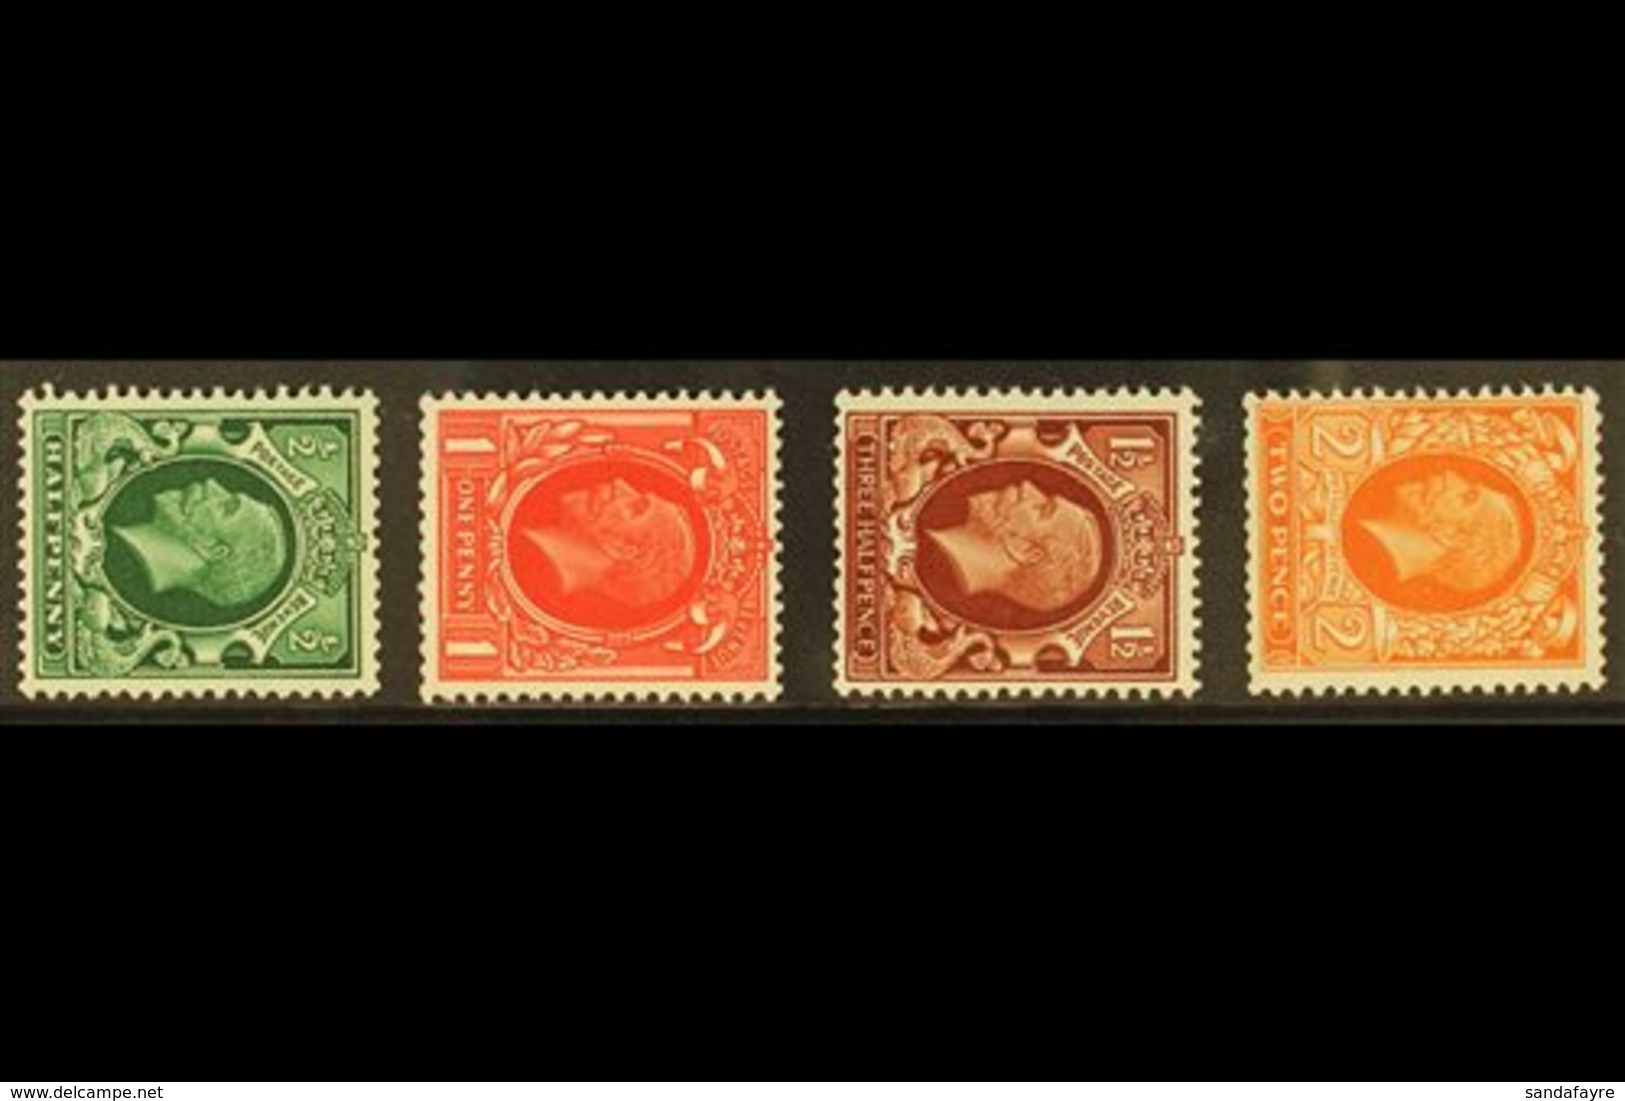 1934-36 Photogravure, Wmk Sideways Set, SG 439a/442a, Never Hinged Mint (4 Stamps). For More Images, Please Visit Http:/ - Unclassified